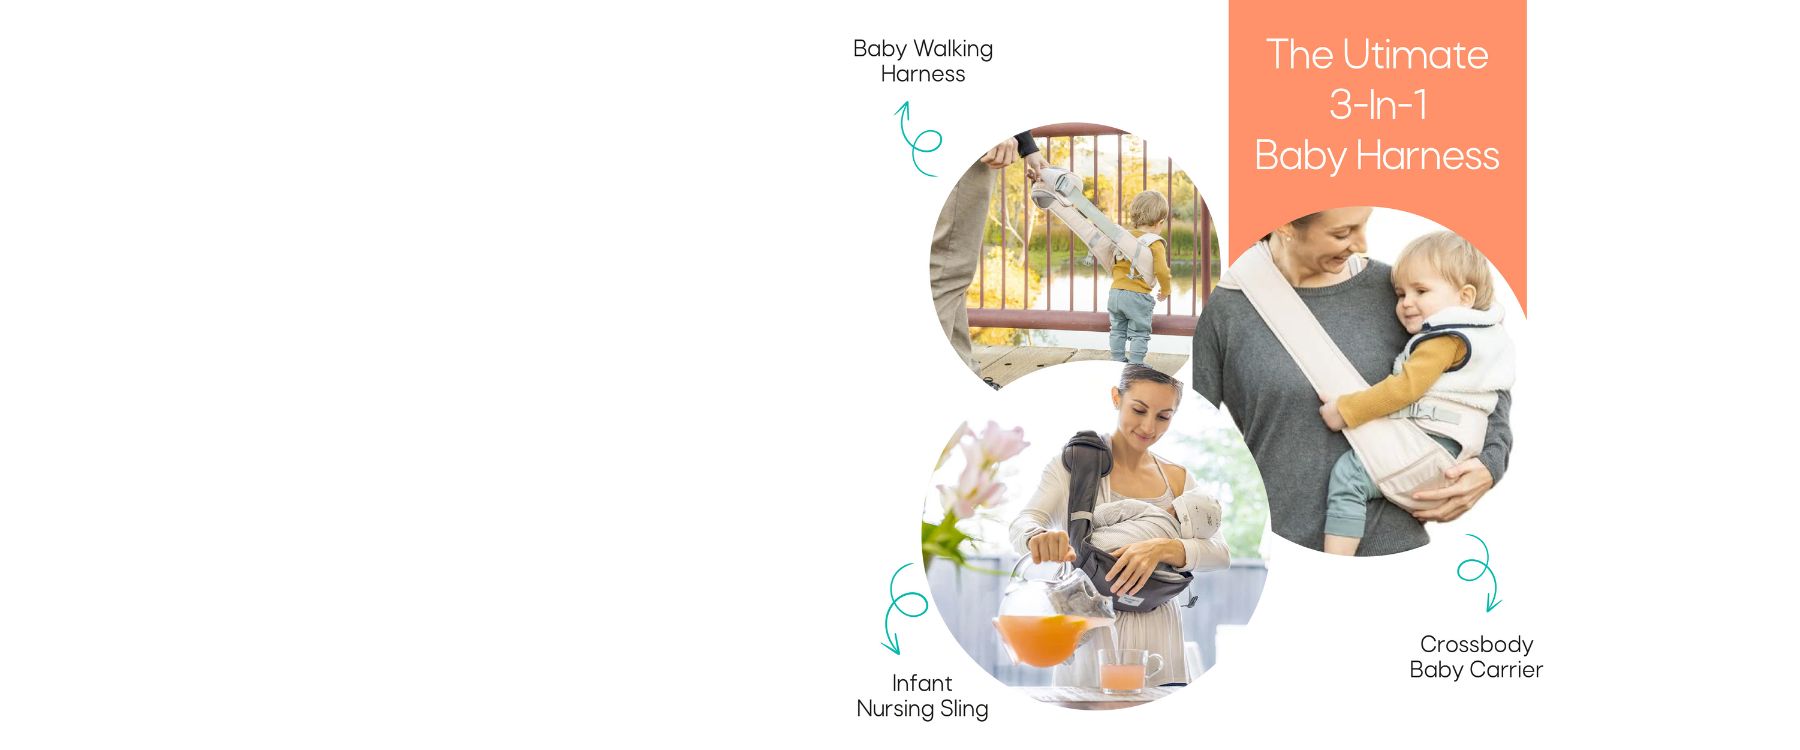 The Guillaumia 3 uses in 1 product. A mother is using the sling to nurse her infant. Another mother is using it to carry the baby crossbody, and lastly a parent is holding a walking baby using the harness function.